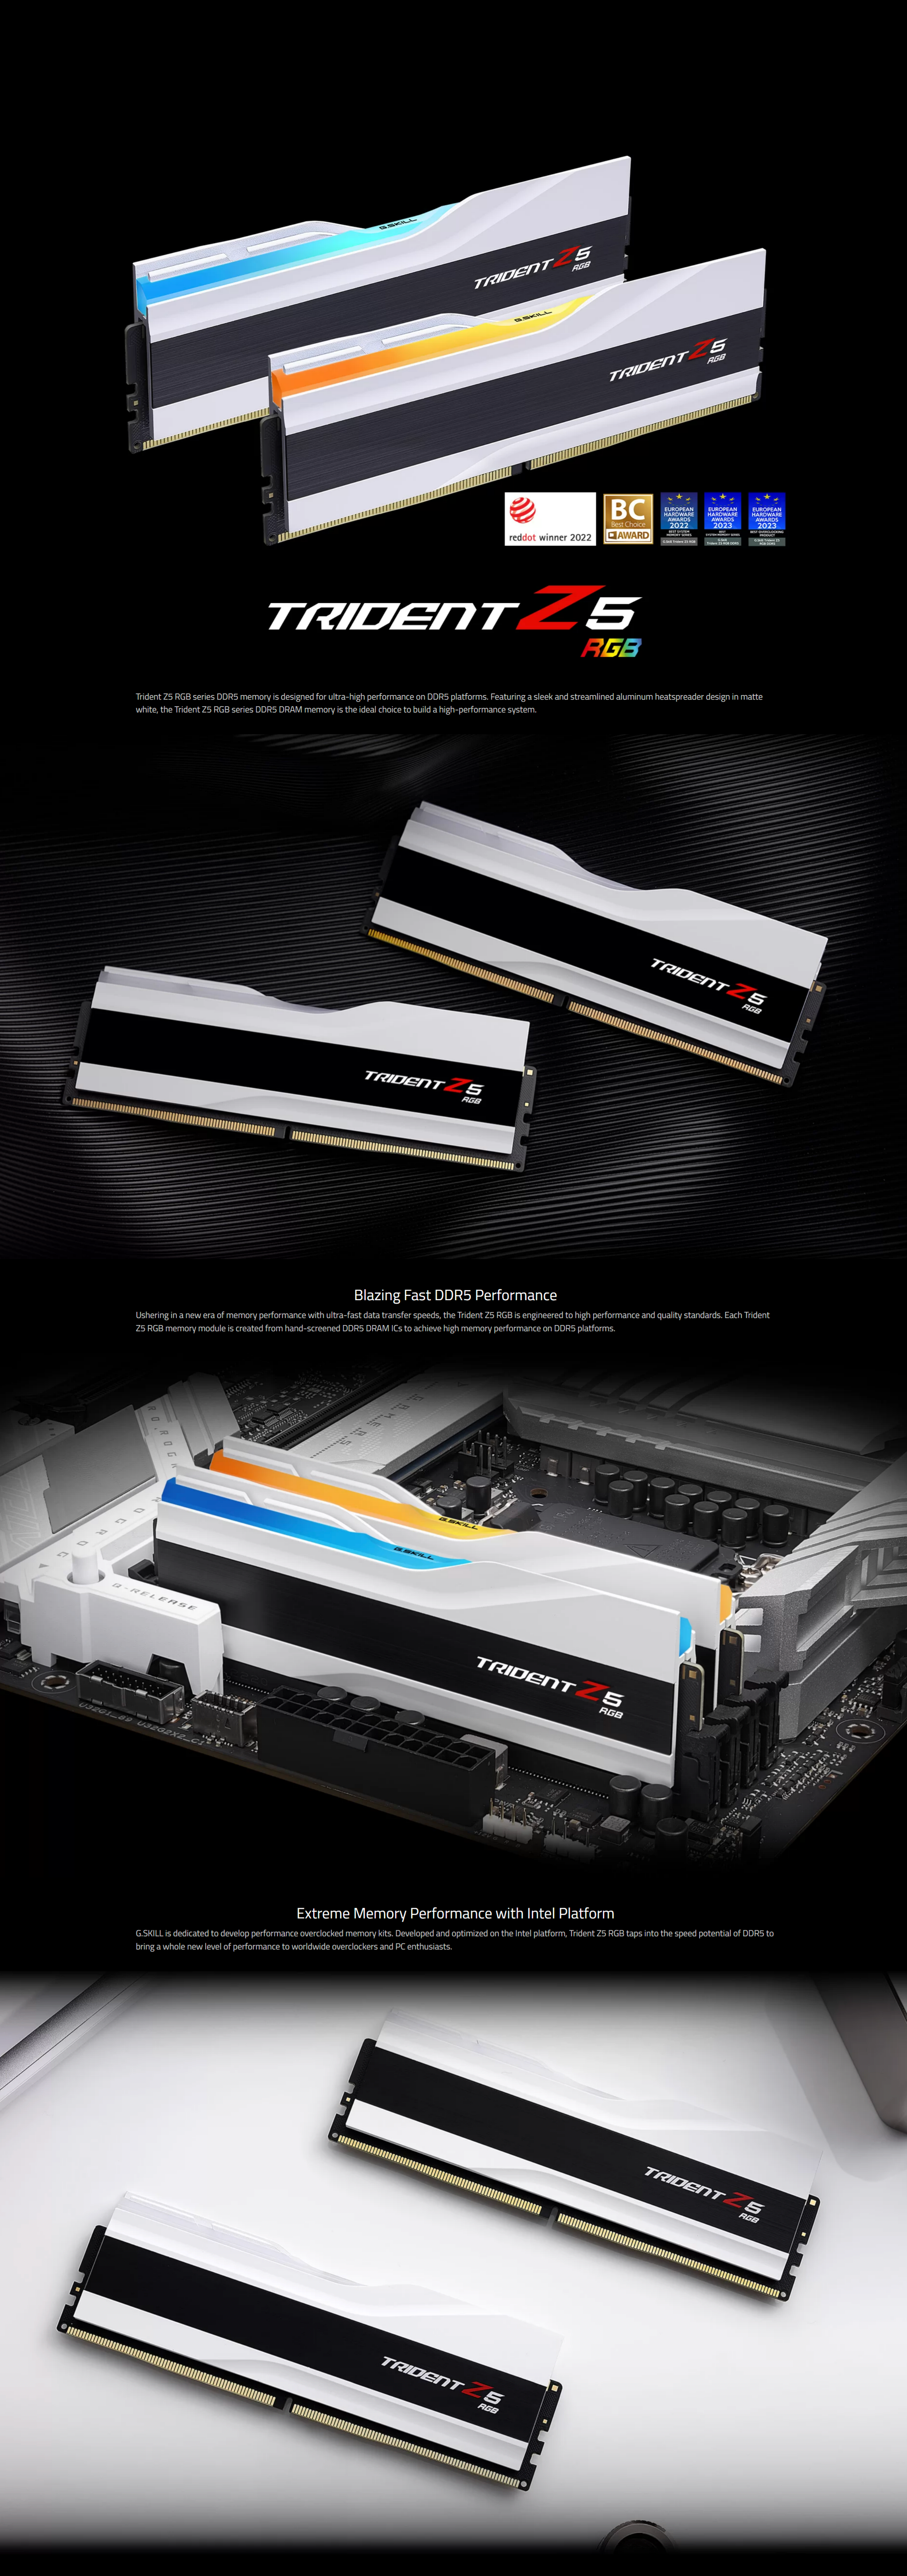 A large marketing image providing additional information about the product G.Skill 48GB Kit (2x 24GB) DDR5 Trident Z5 RGB CL40 8400MHz- Black - Additional alt info not provided